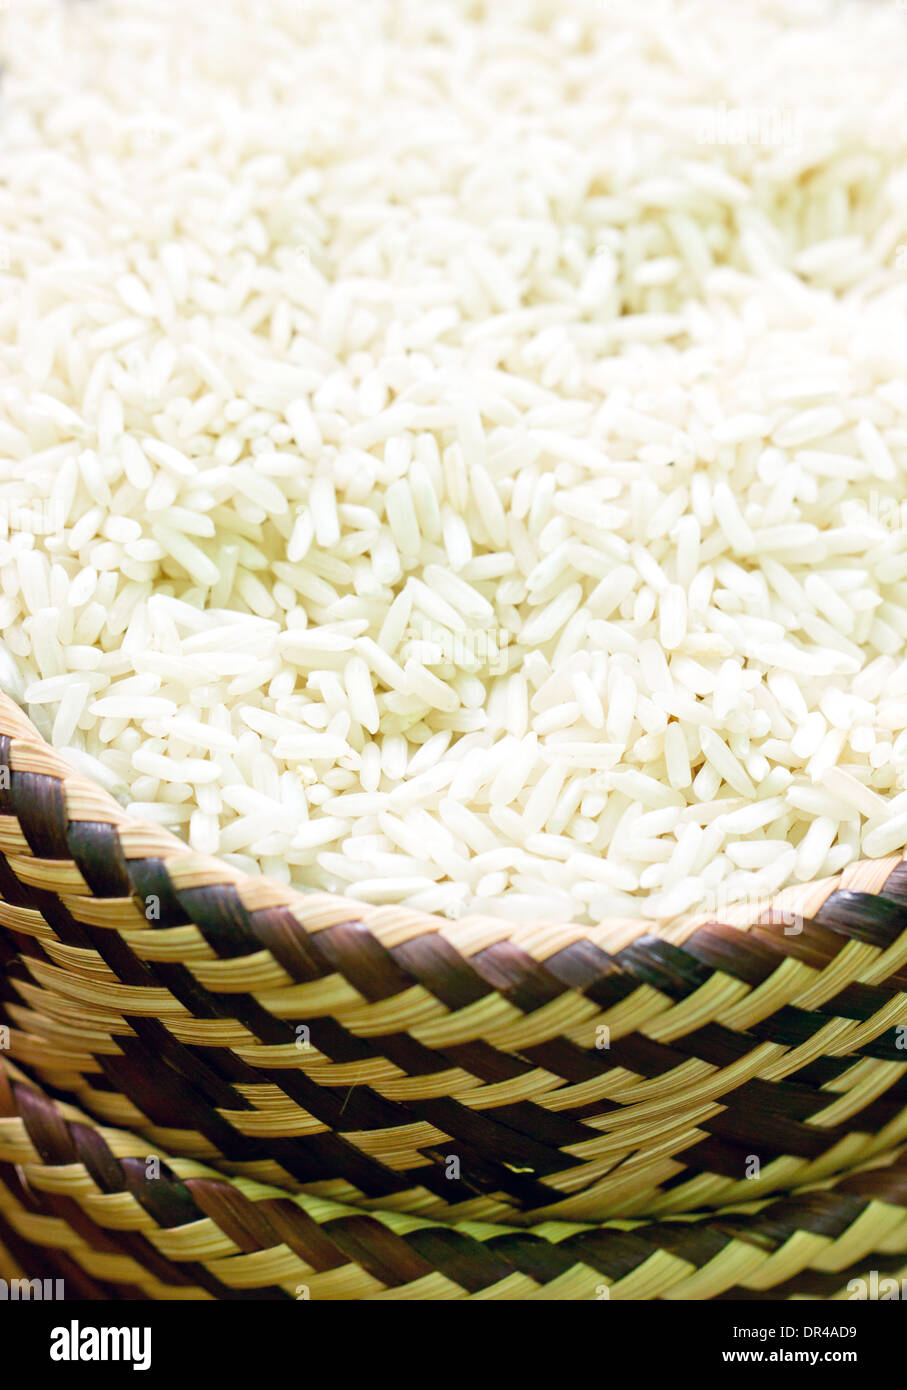 Uncooked rice in bamboo basket. Stock Photo